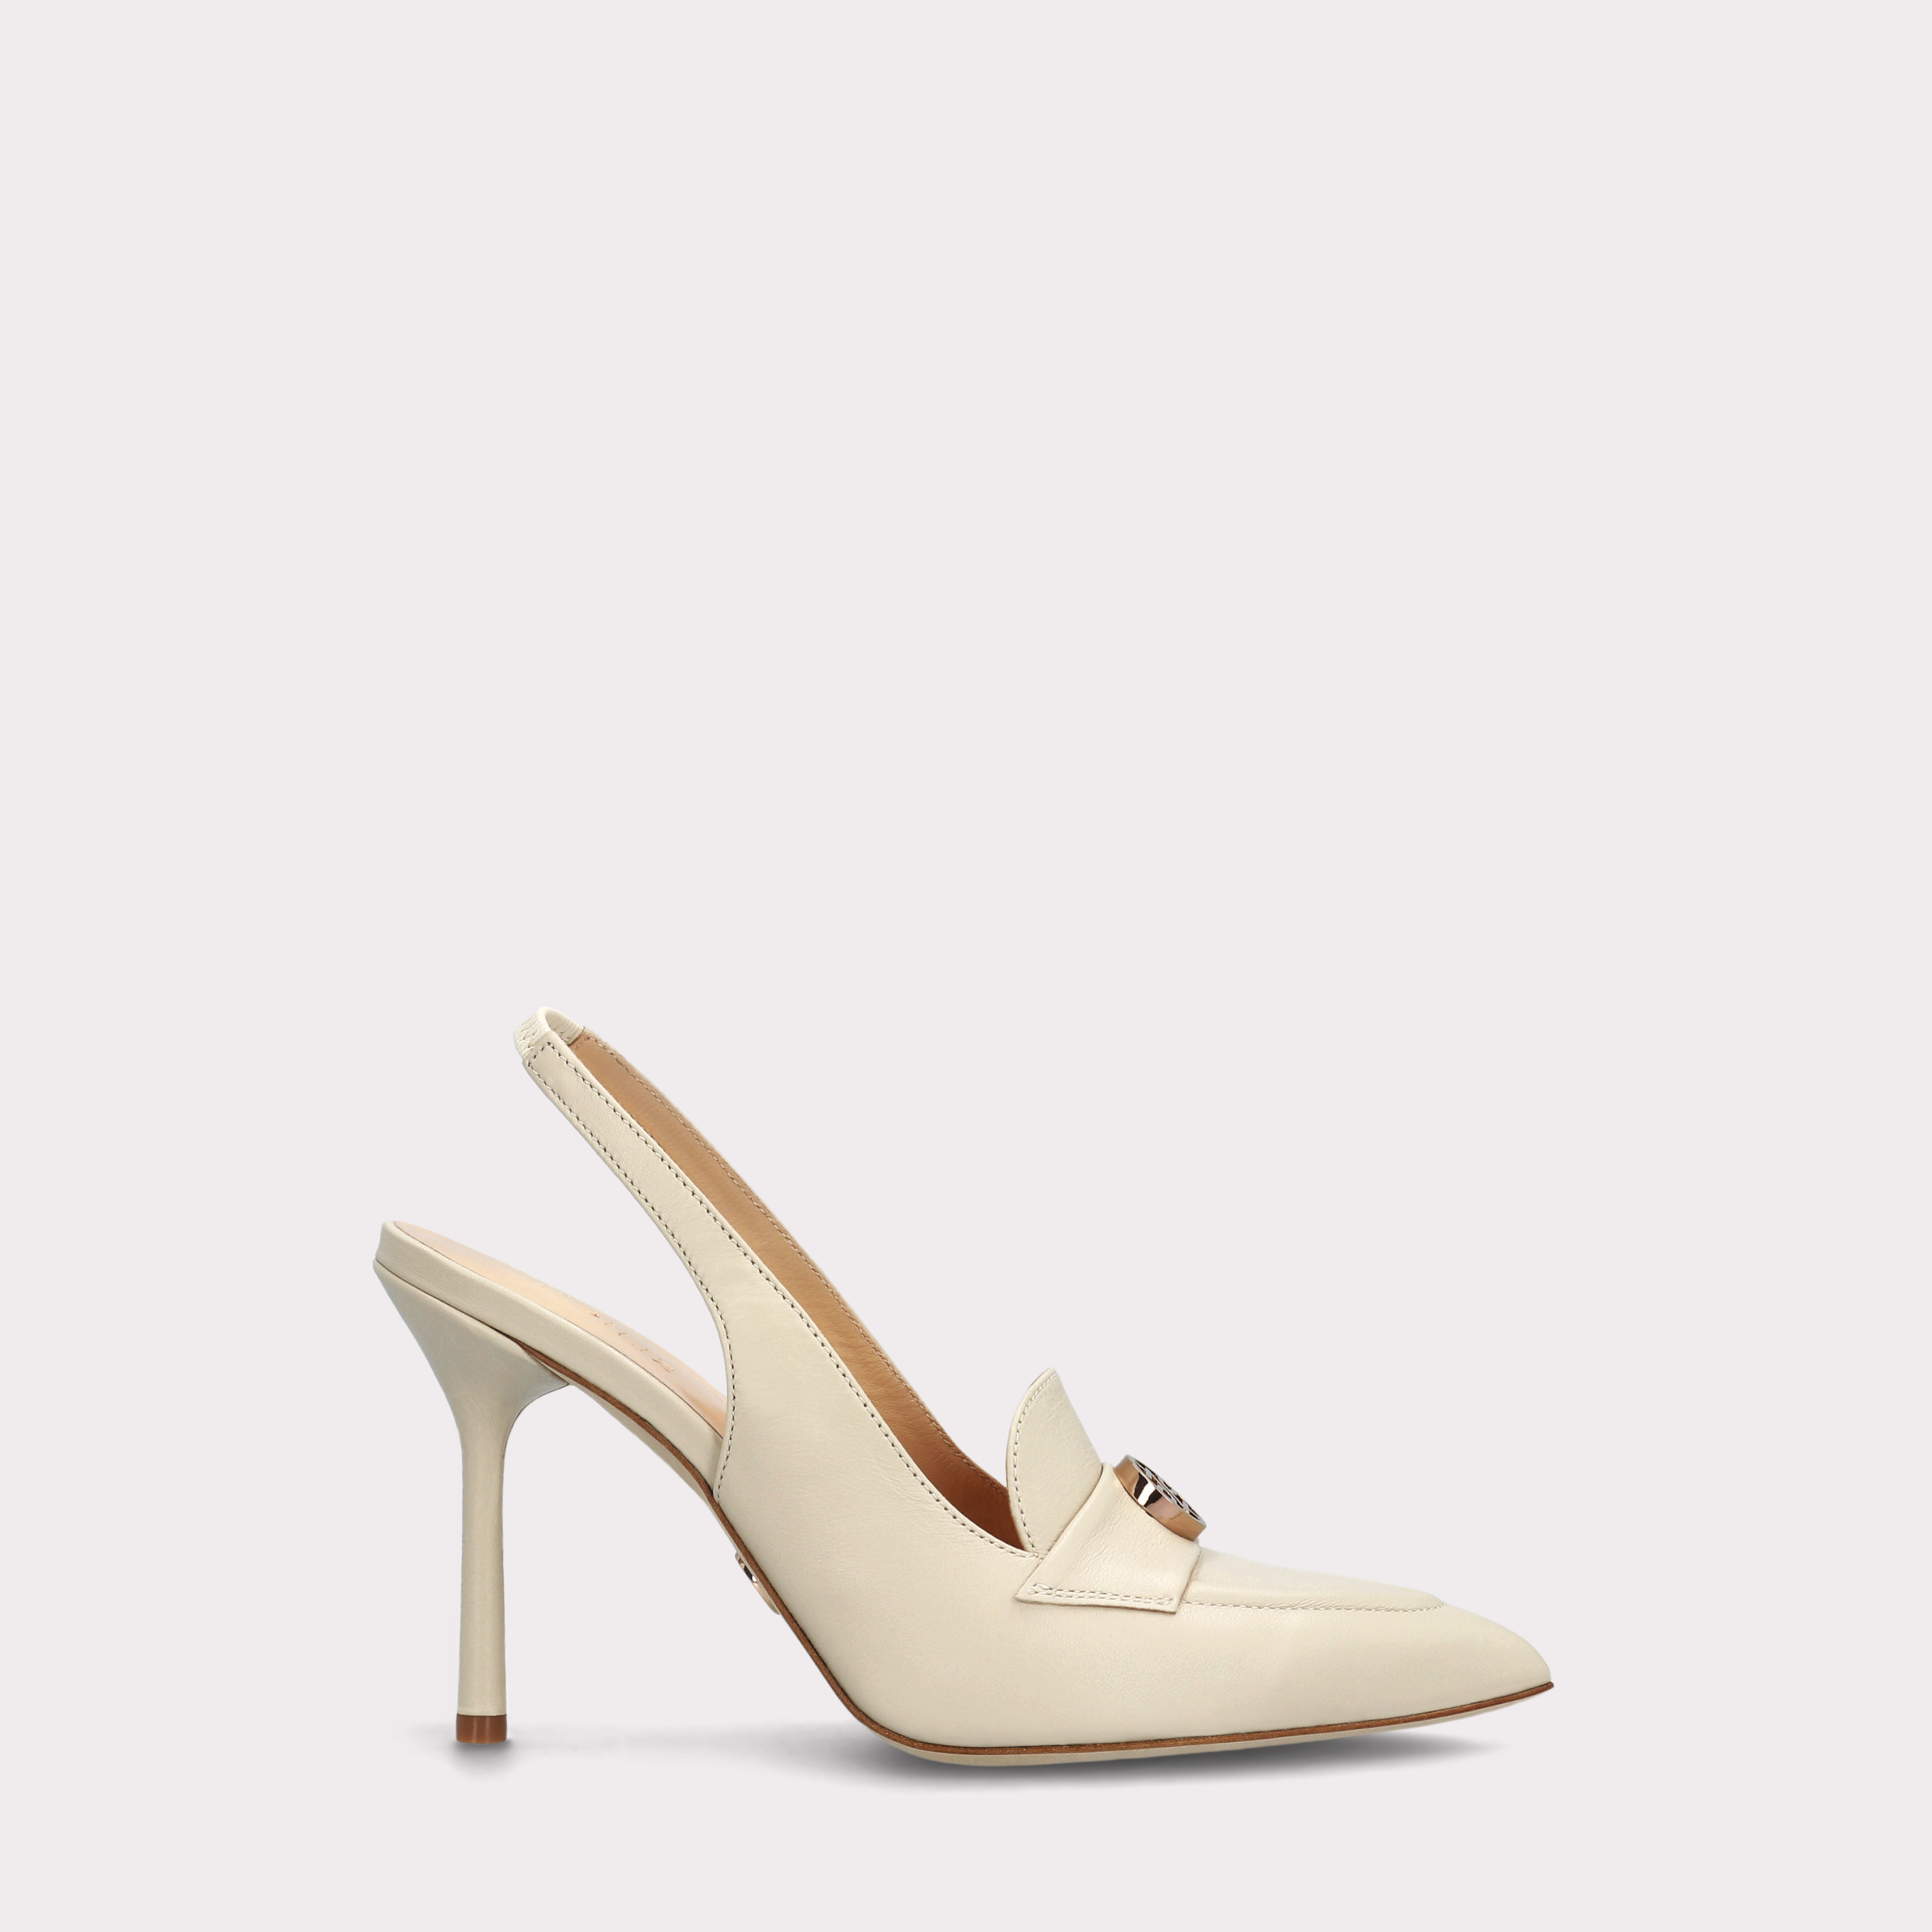 ABA 15 IVORY LEATHER PUMPS